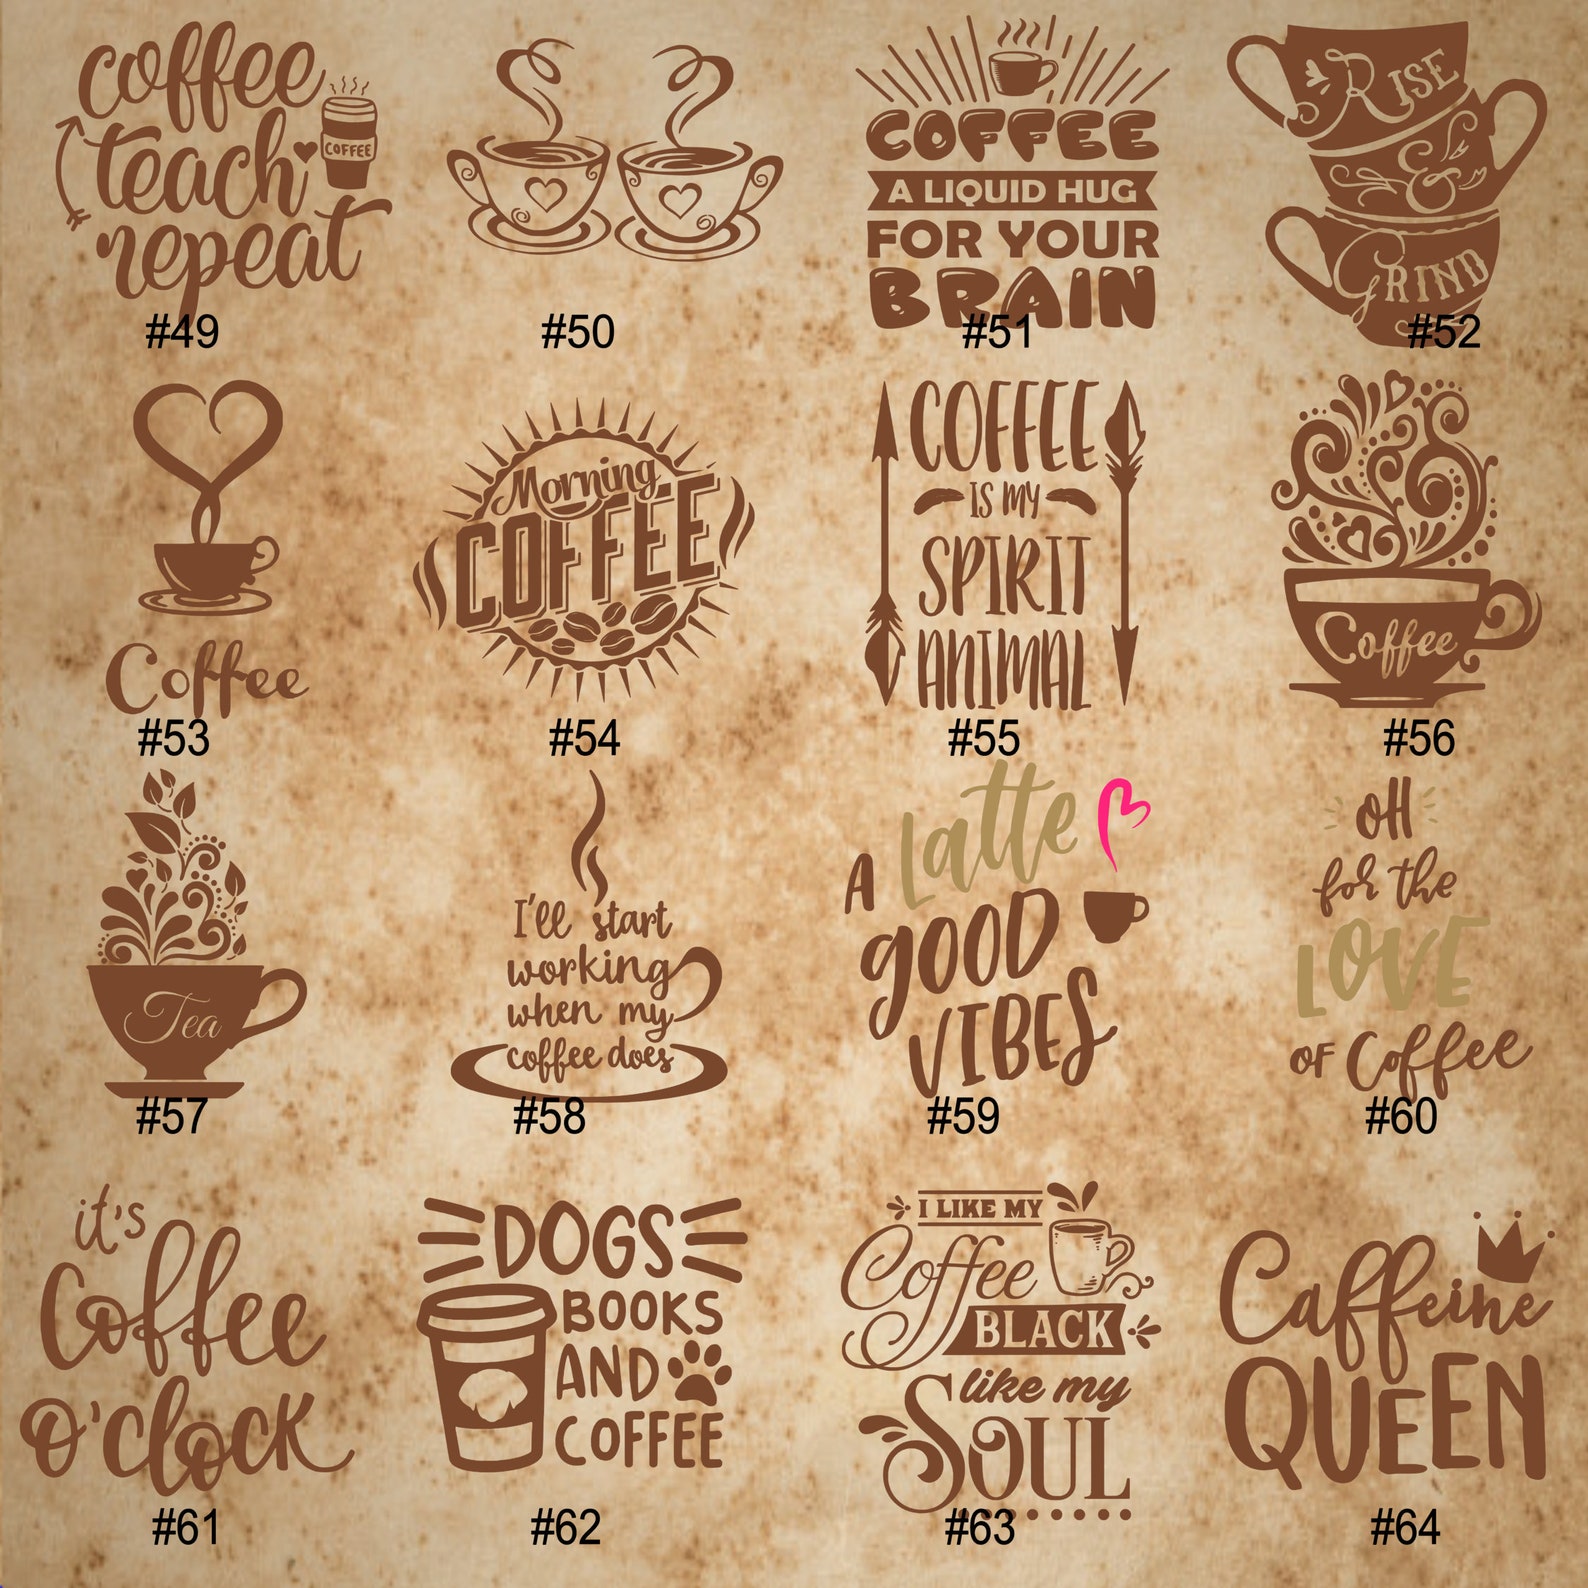 CFE17 32 COFFEE QUOTE vinyl decal  latte lover  car  decal  Etsy